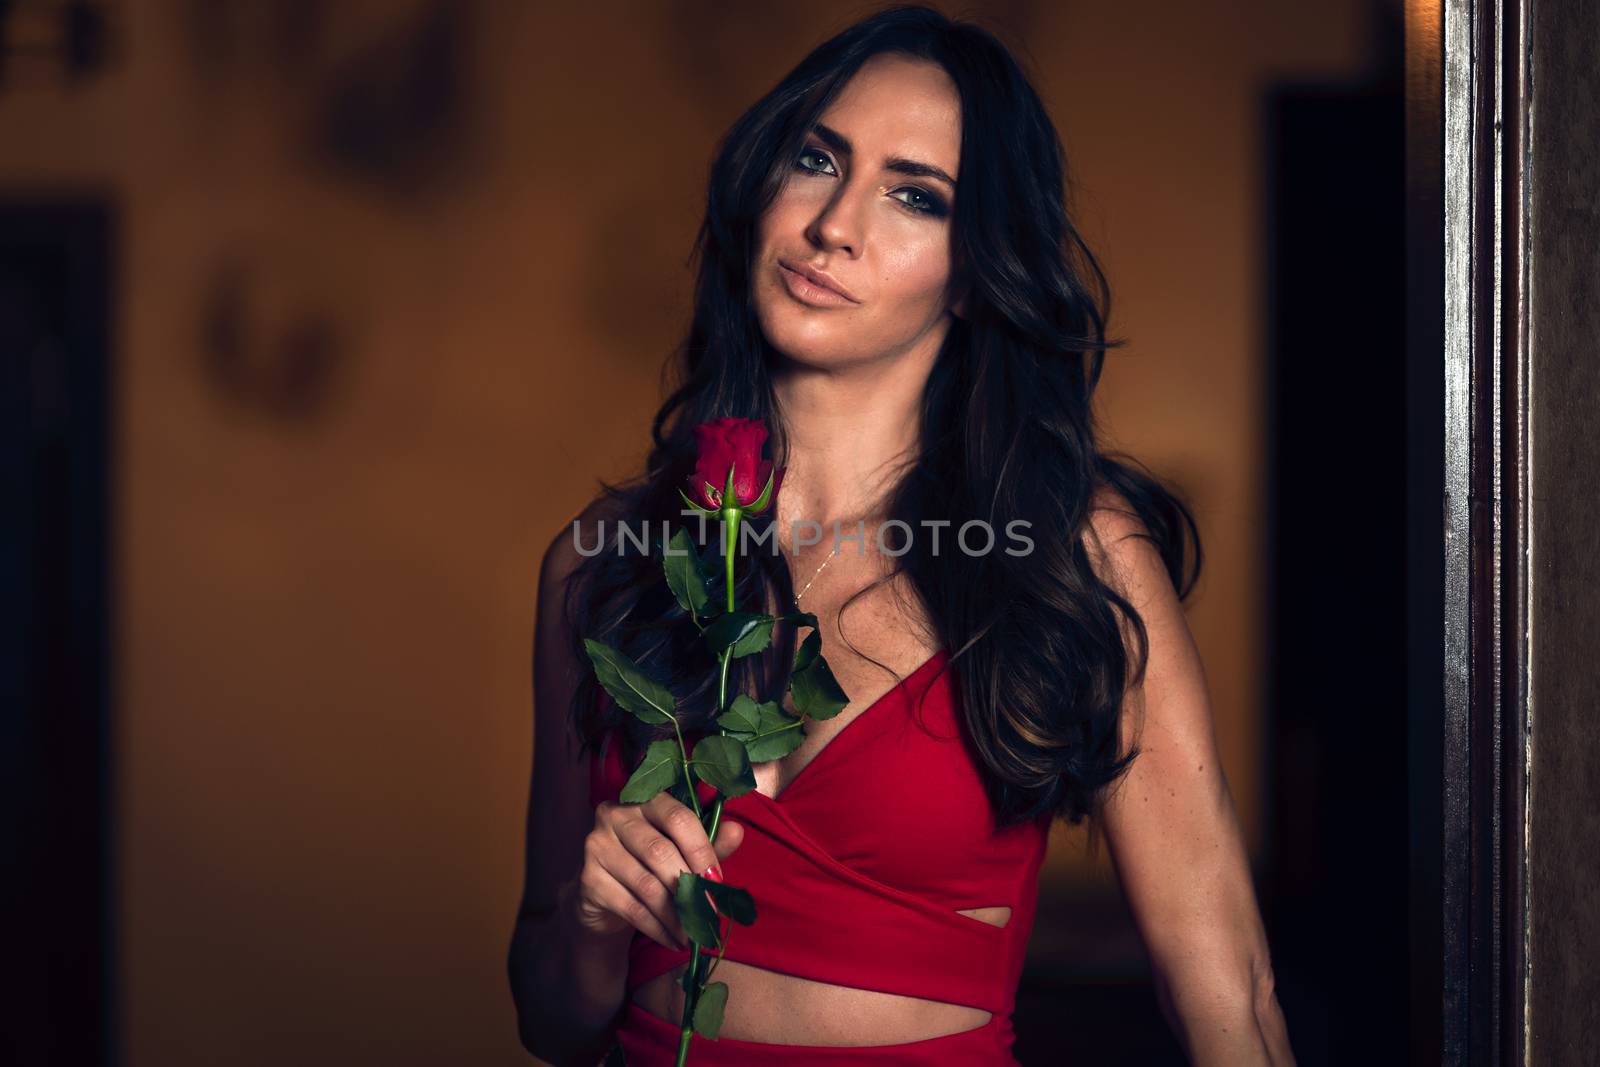 Portrait of a beautiful and elegant woman holding a rose in an evening red dress